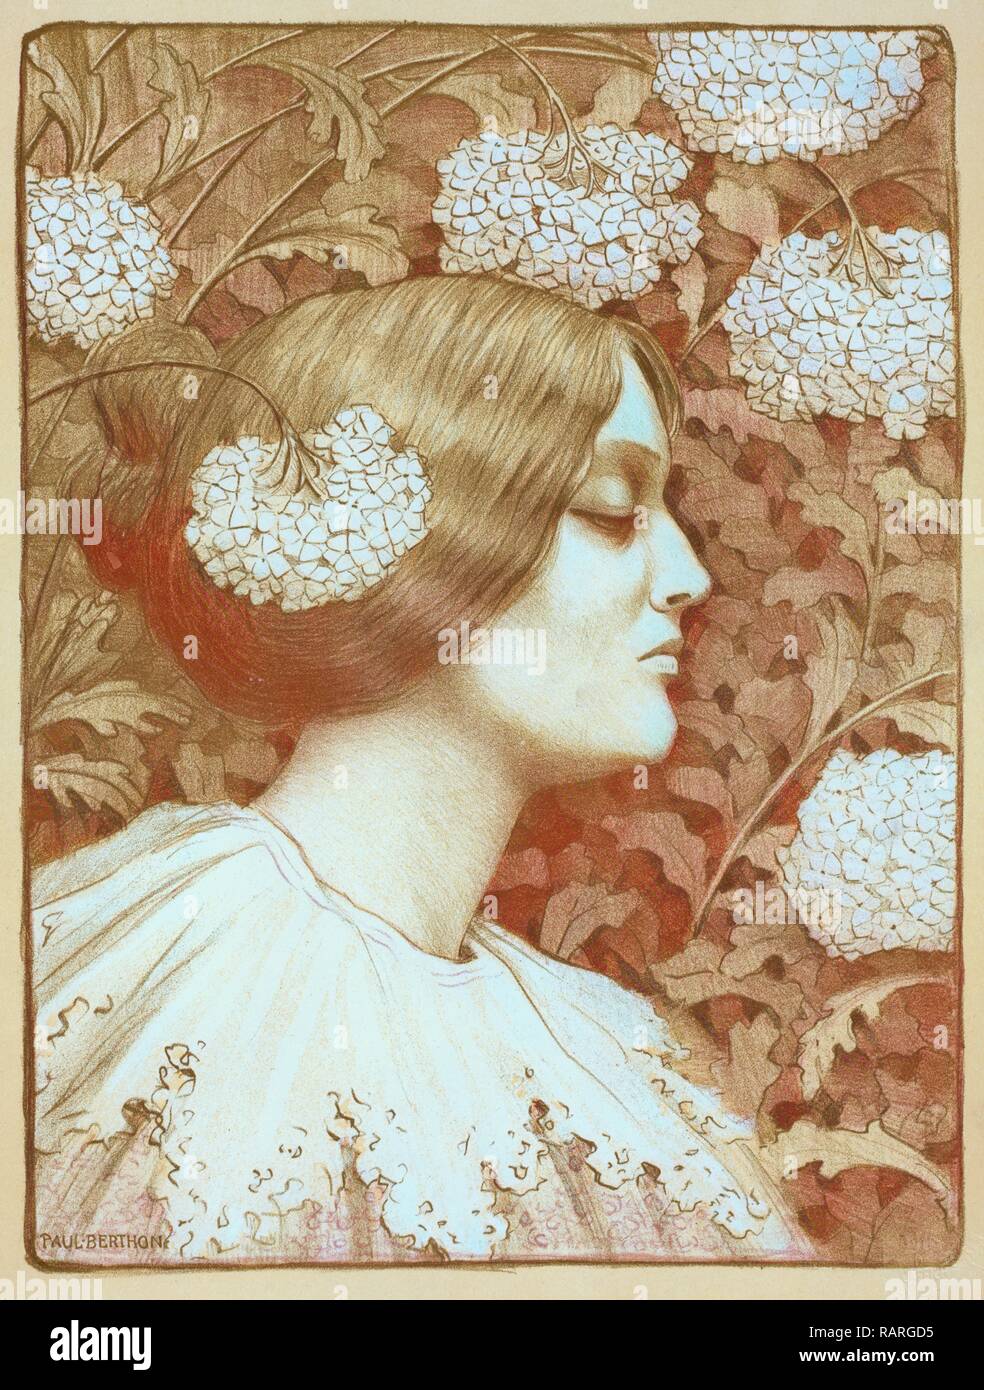 Original drawing for les Maîtres de l'Poster. Berthon, Paul, 1872-1909, Artist. Reimagined by Gibon. Classic art with reimagined Stock Photo